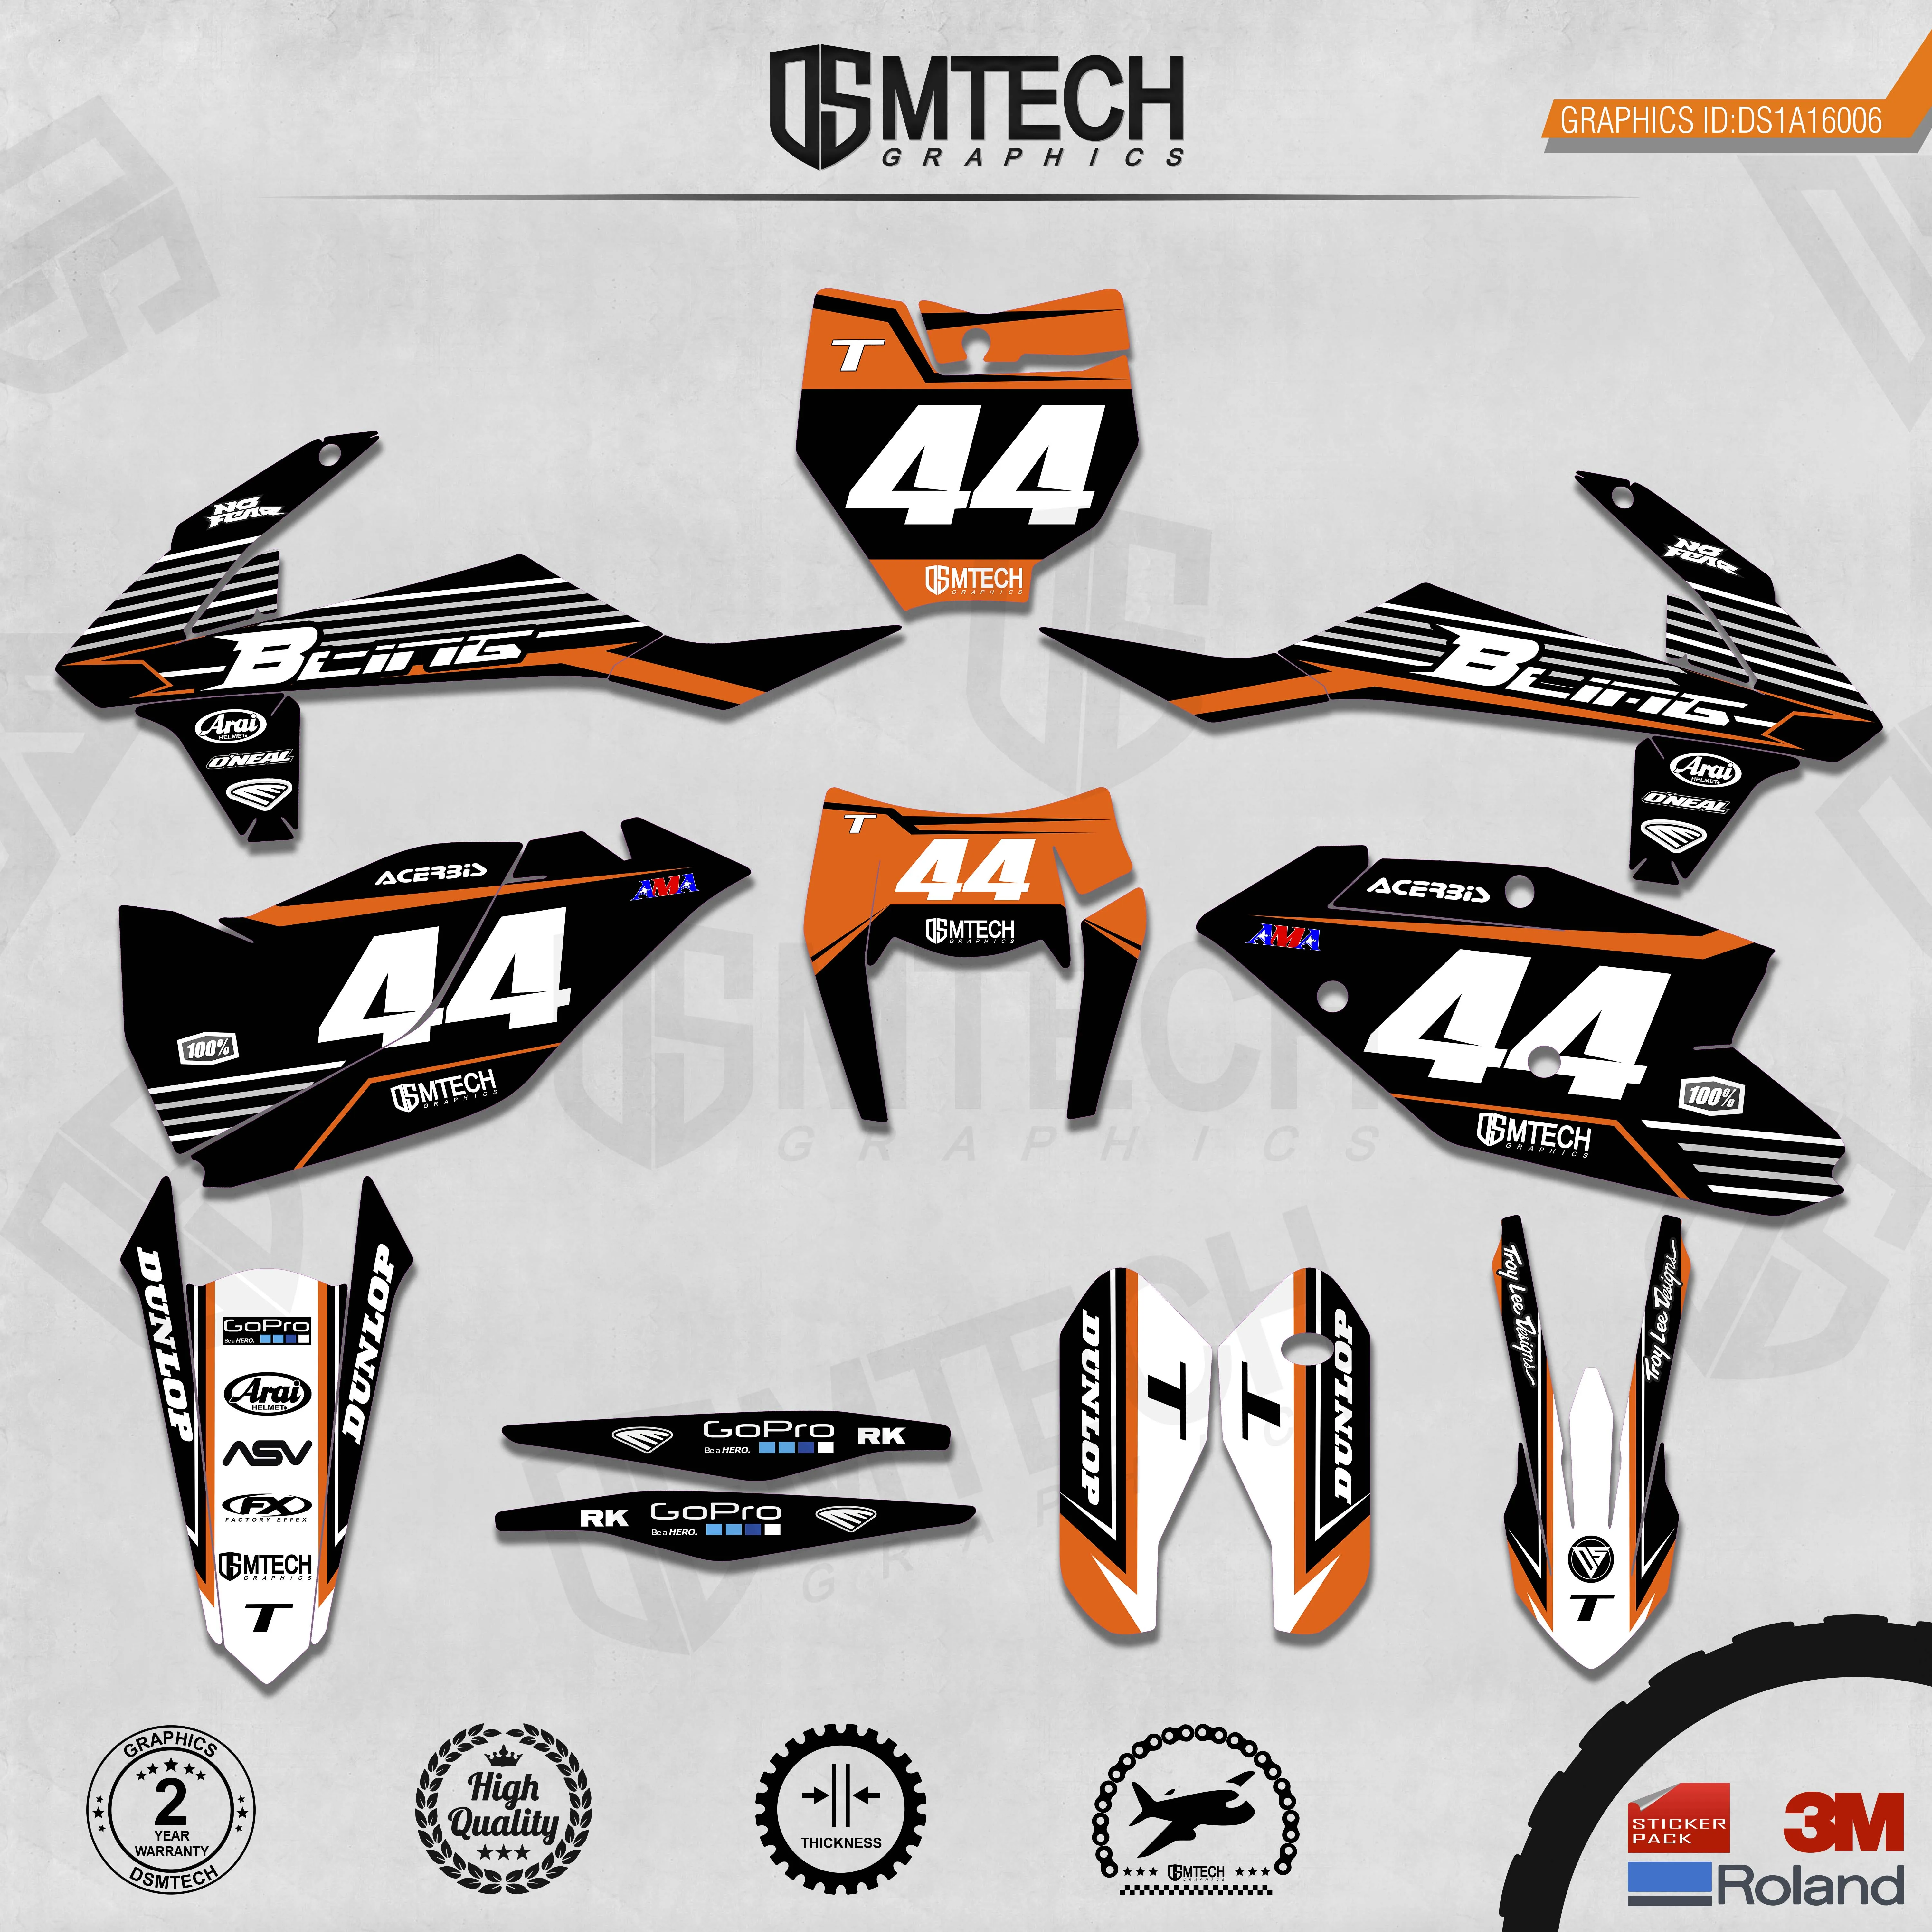 DSMTECH Customized Team Graphics Backgrounds Decals 3M Custom Stickers For KTM 2017-2019 EXC 2016-2018 SXF  006